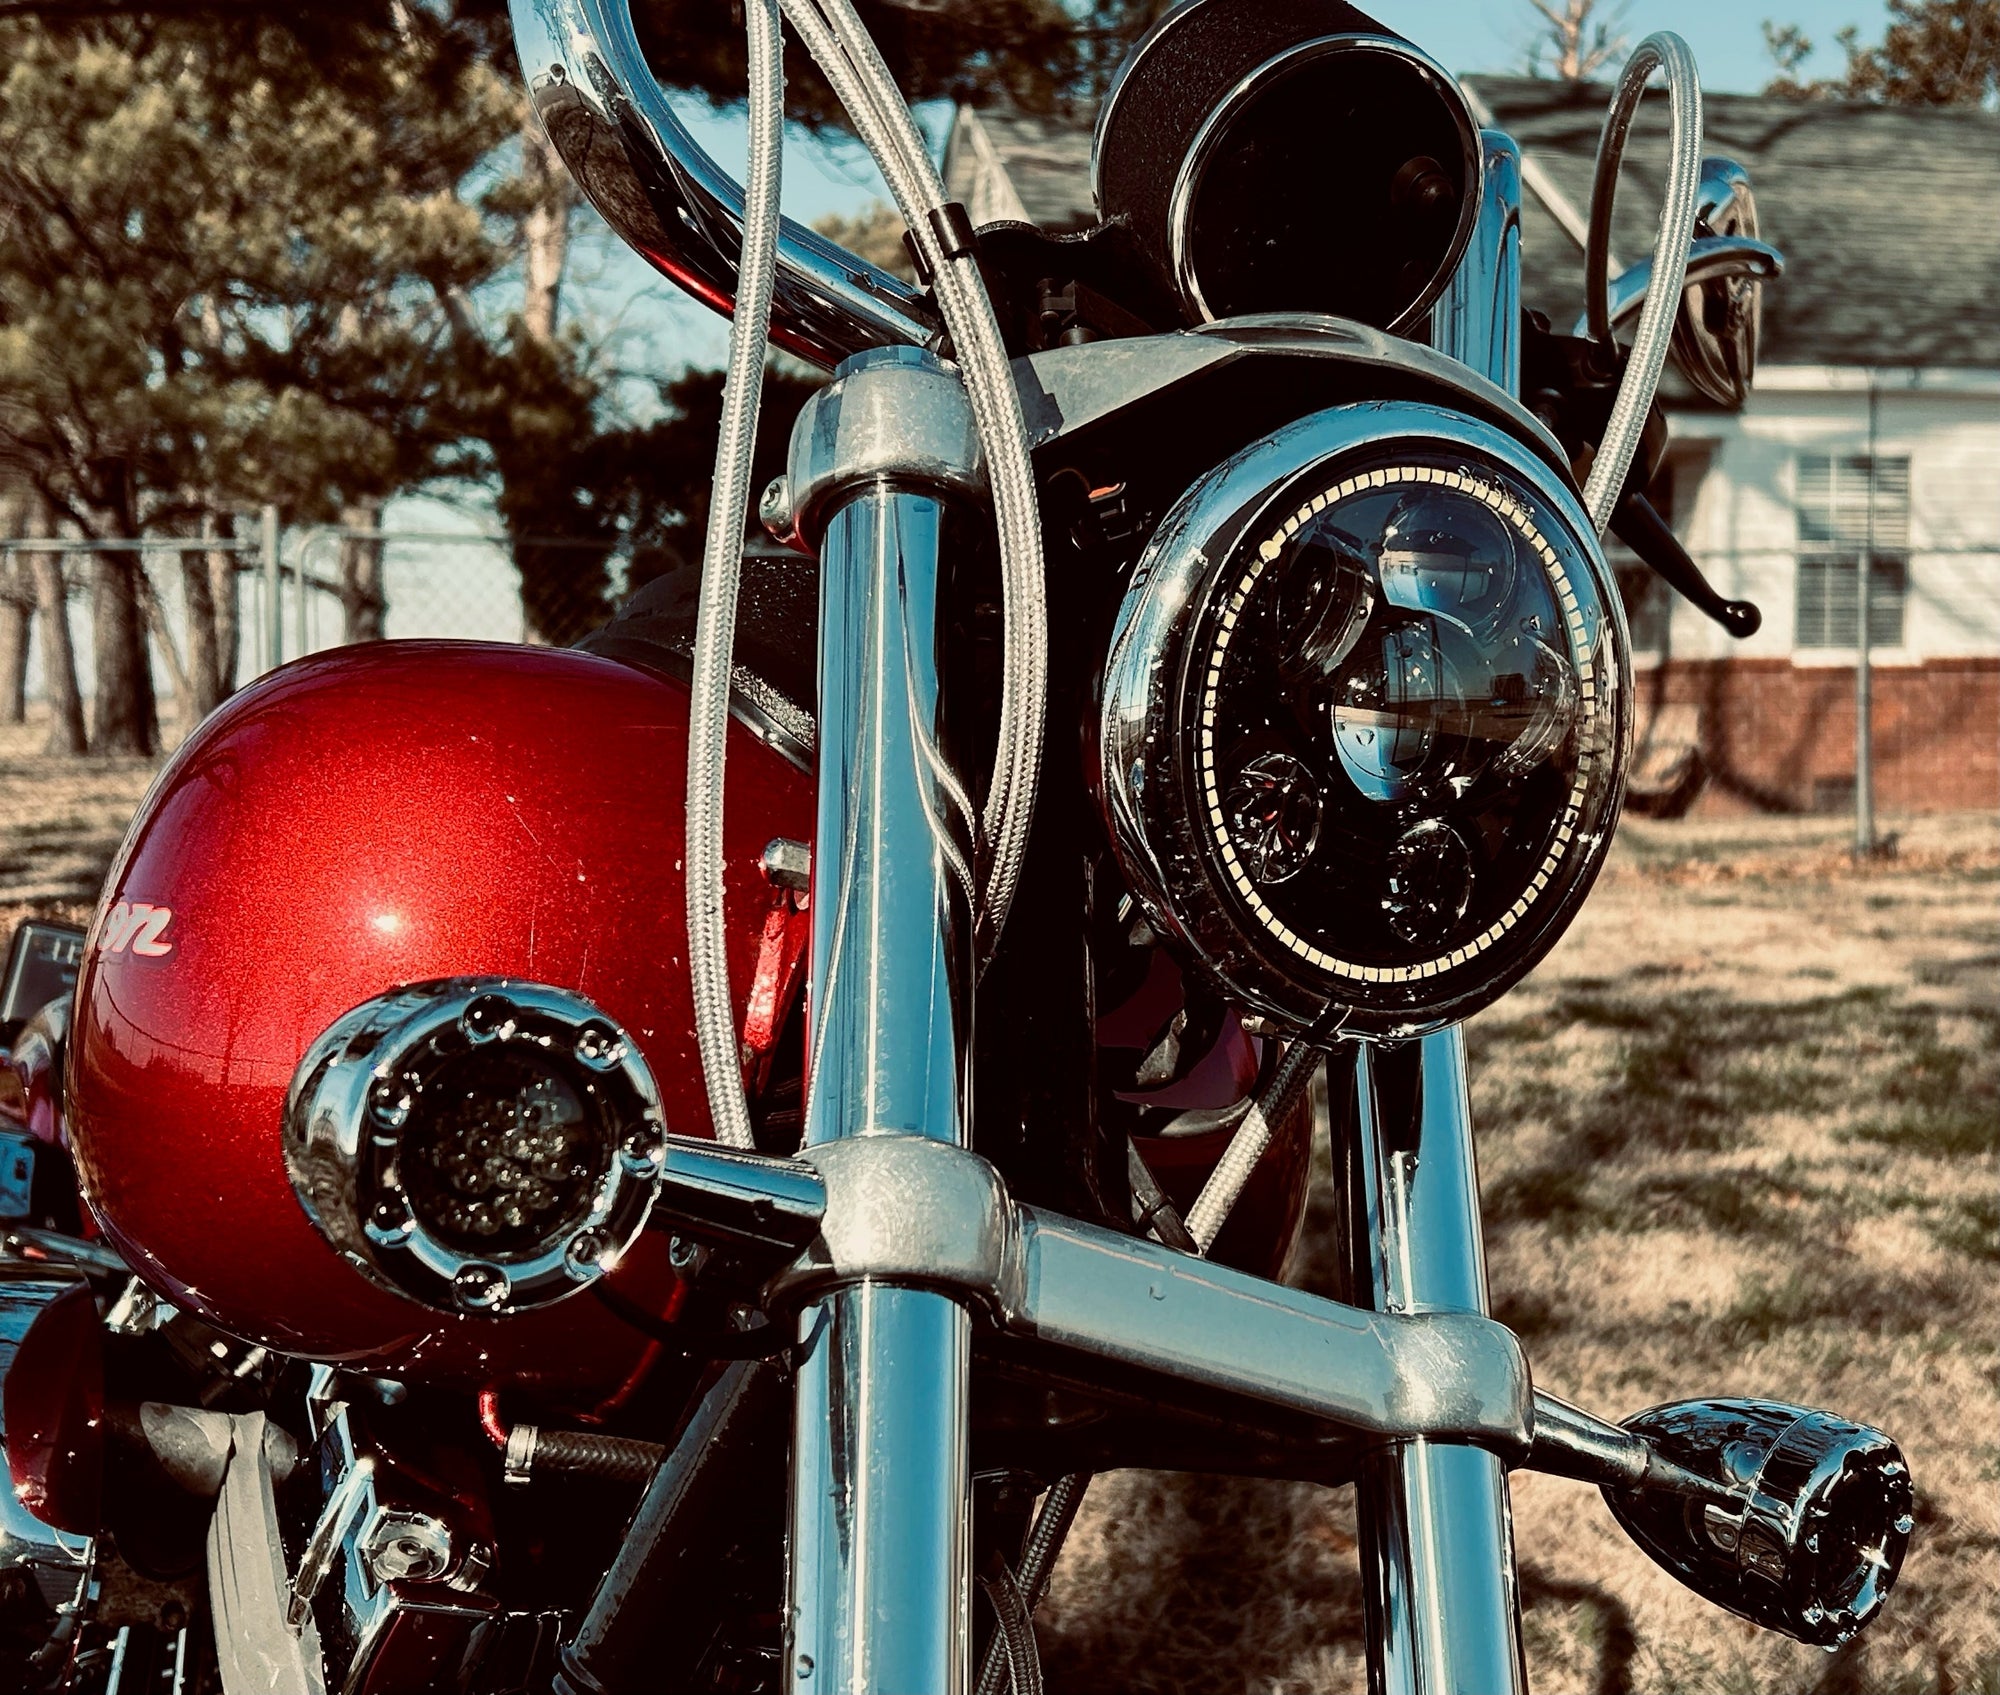 Essential Steps to Prepare Your Motorcycle for the Riding Season